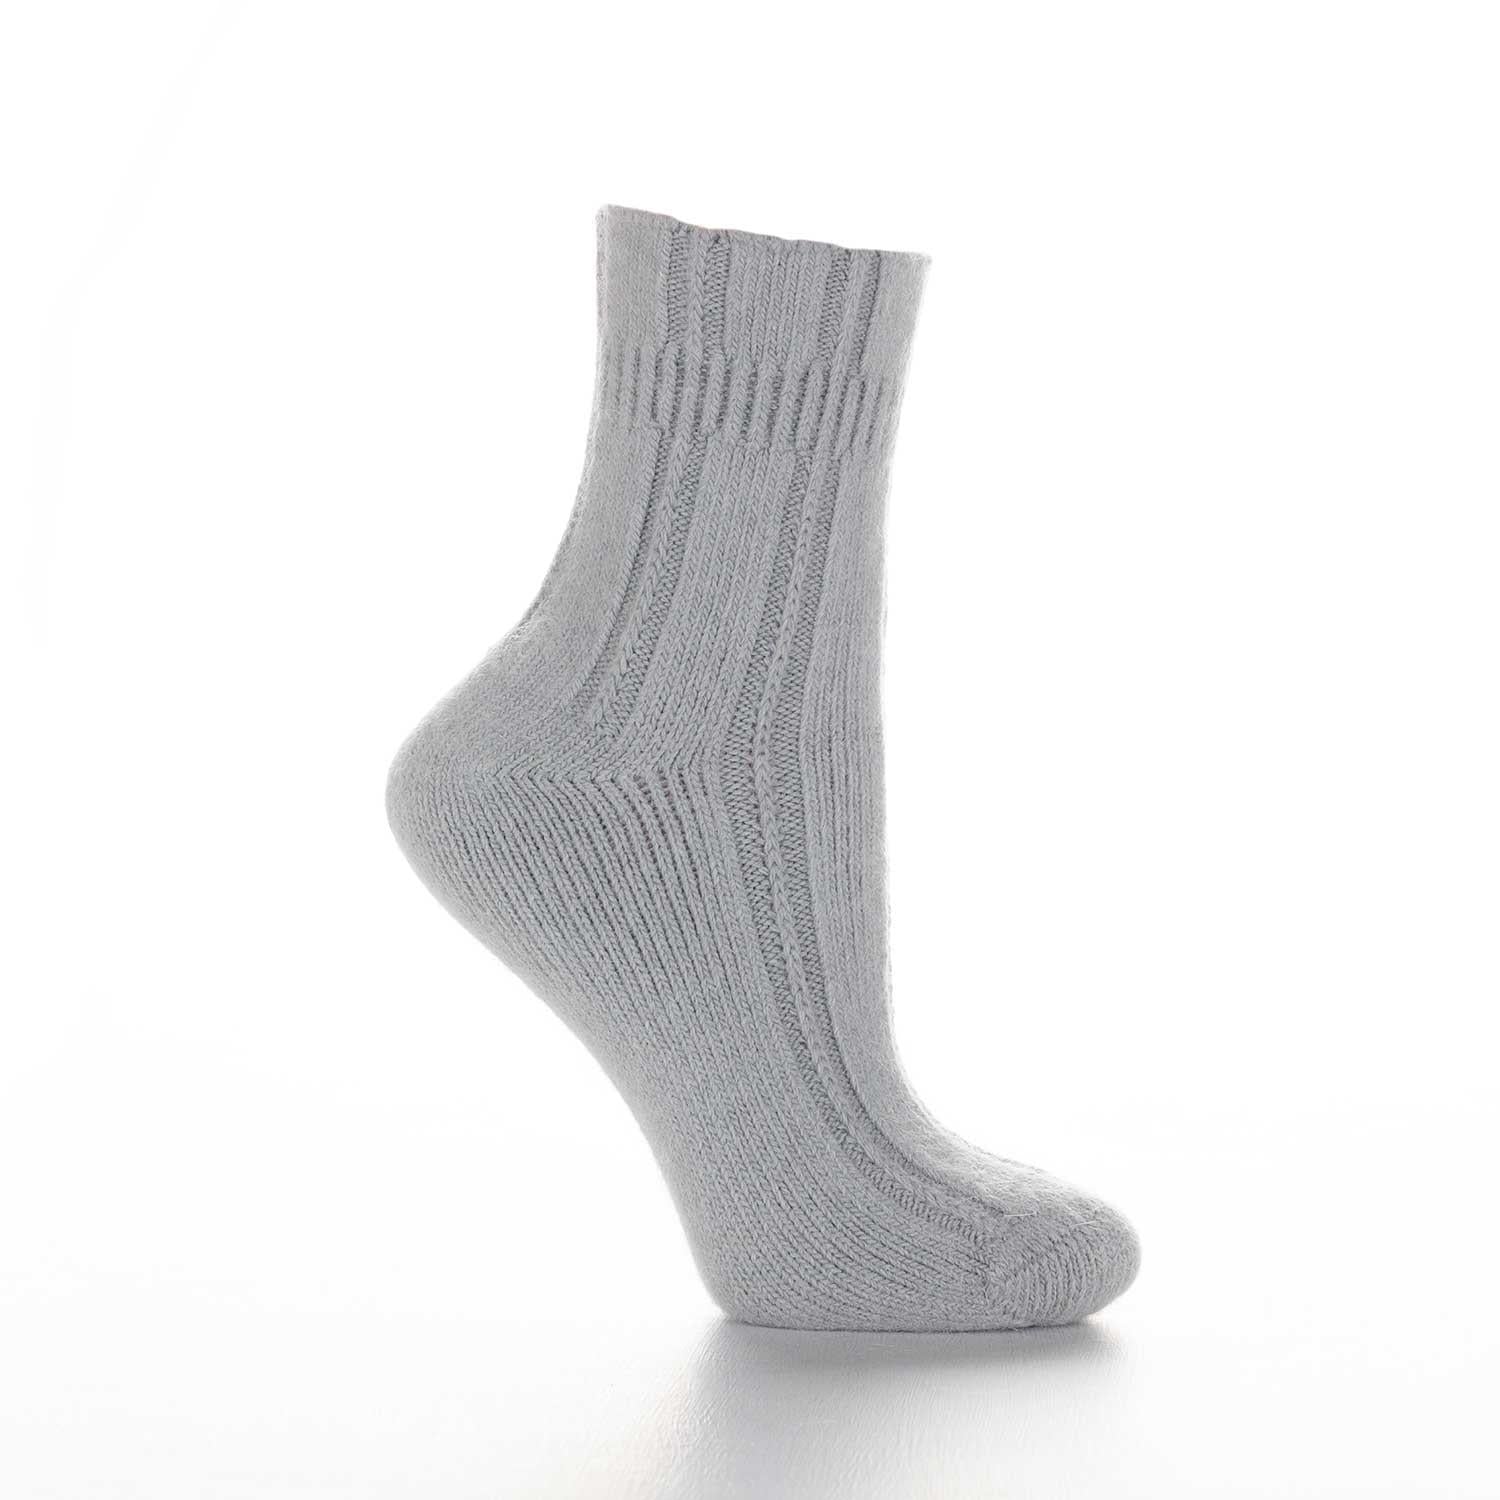 Angora Bed Socks. Ankle socks made with a blend of Angora fibres, with ...